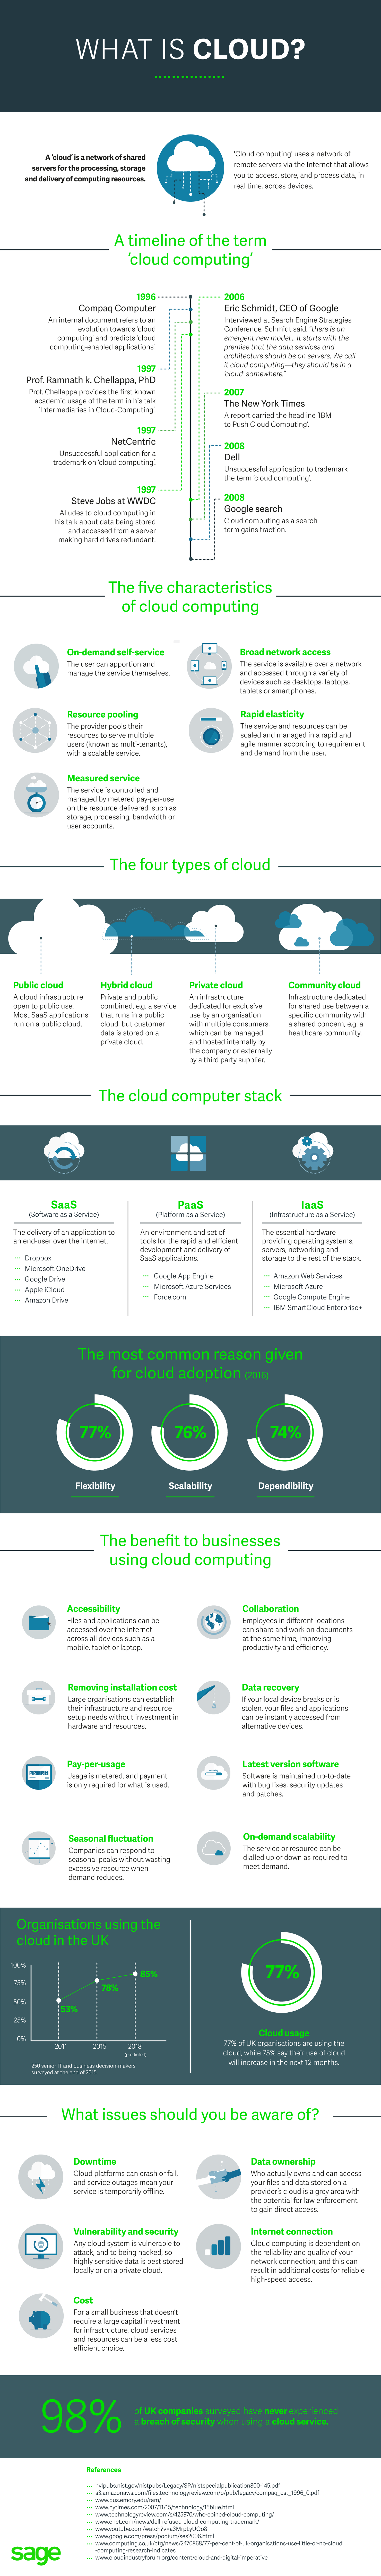 What is cloud infographic